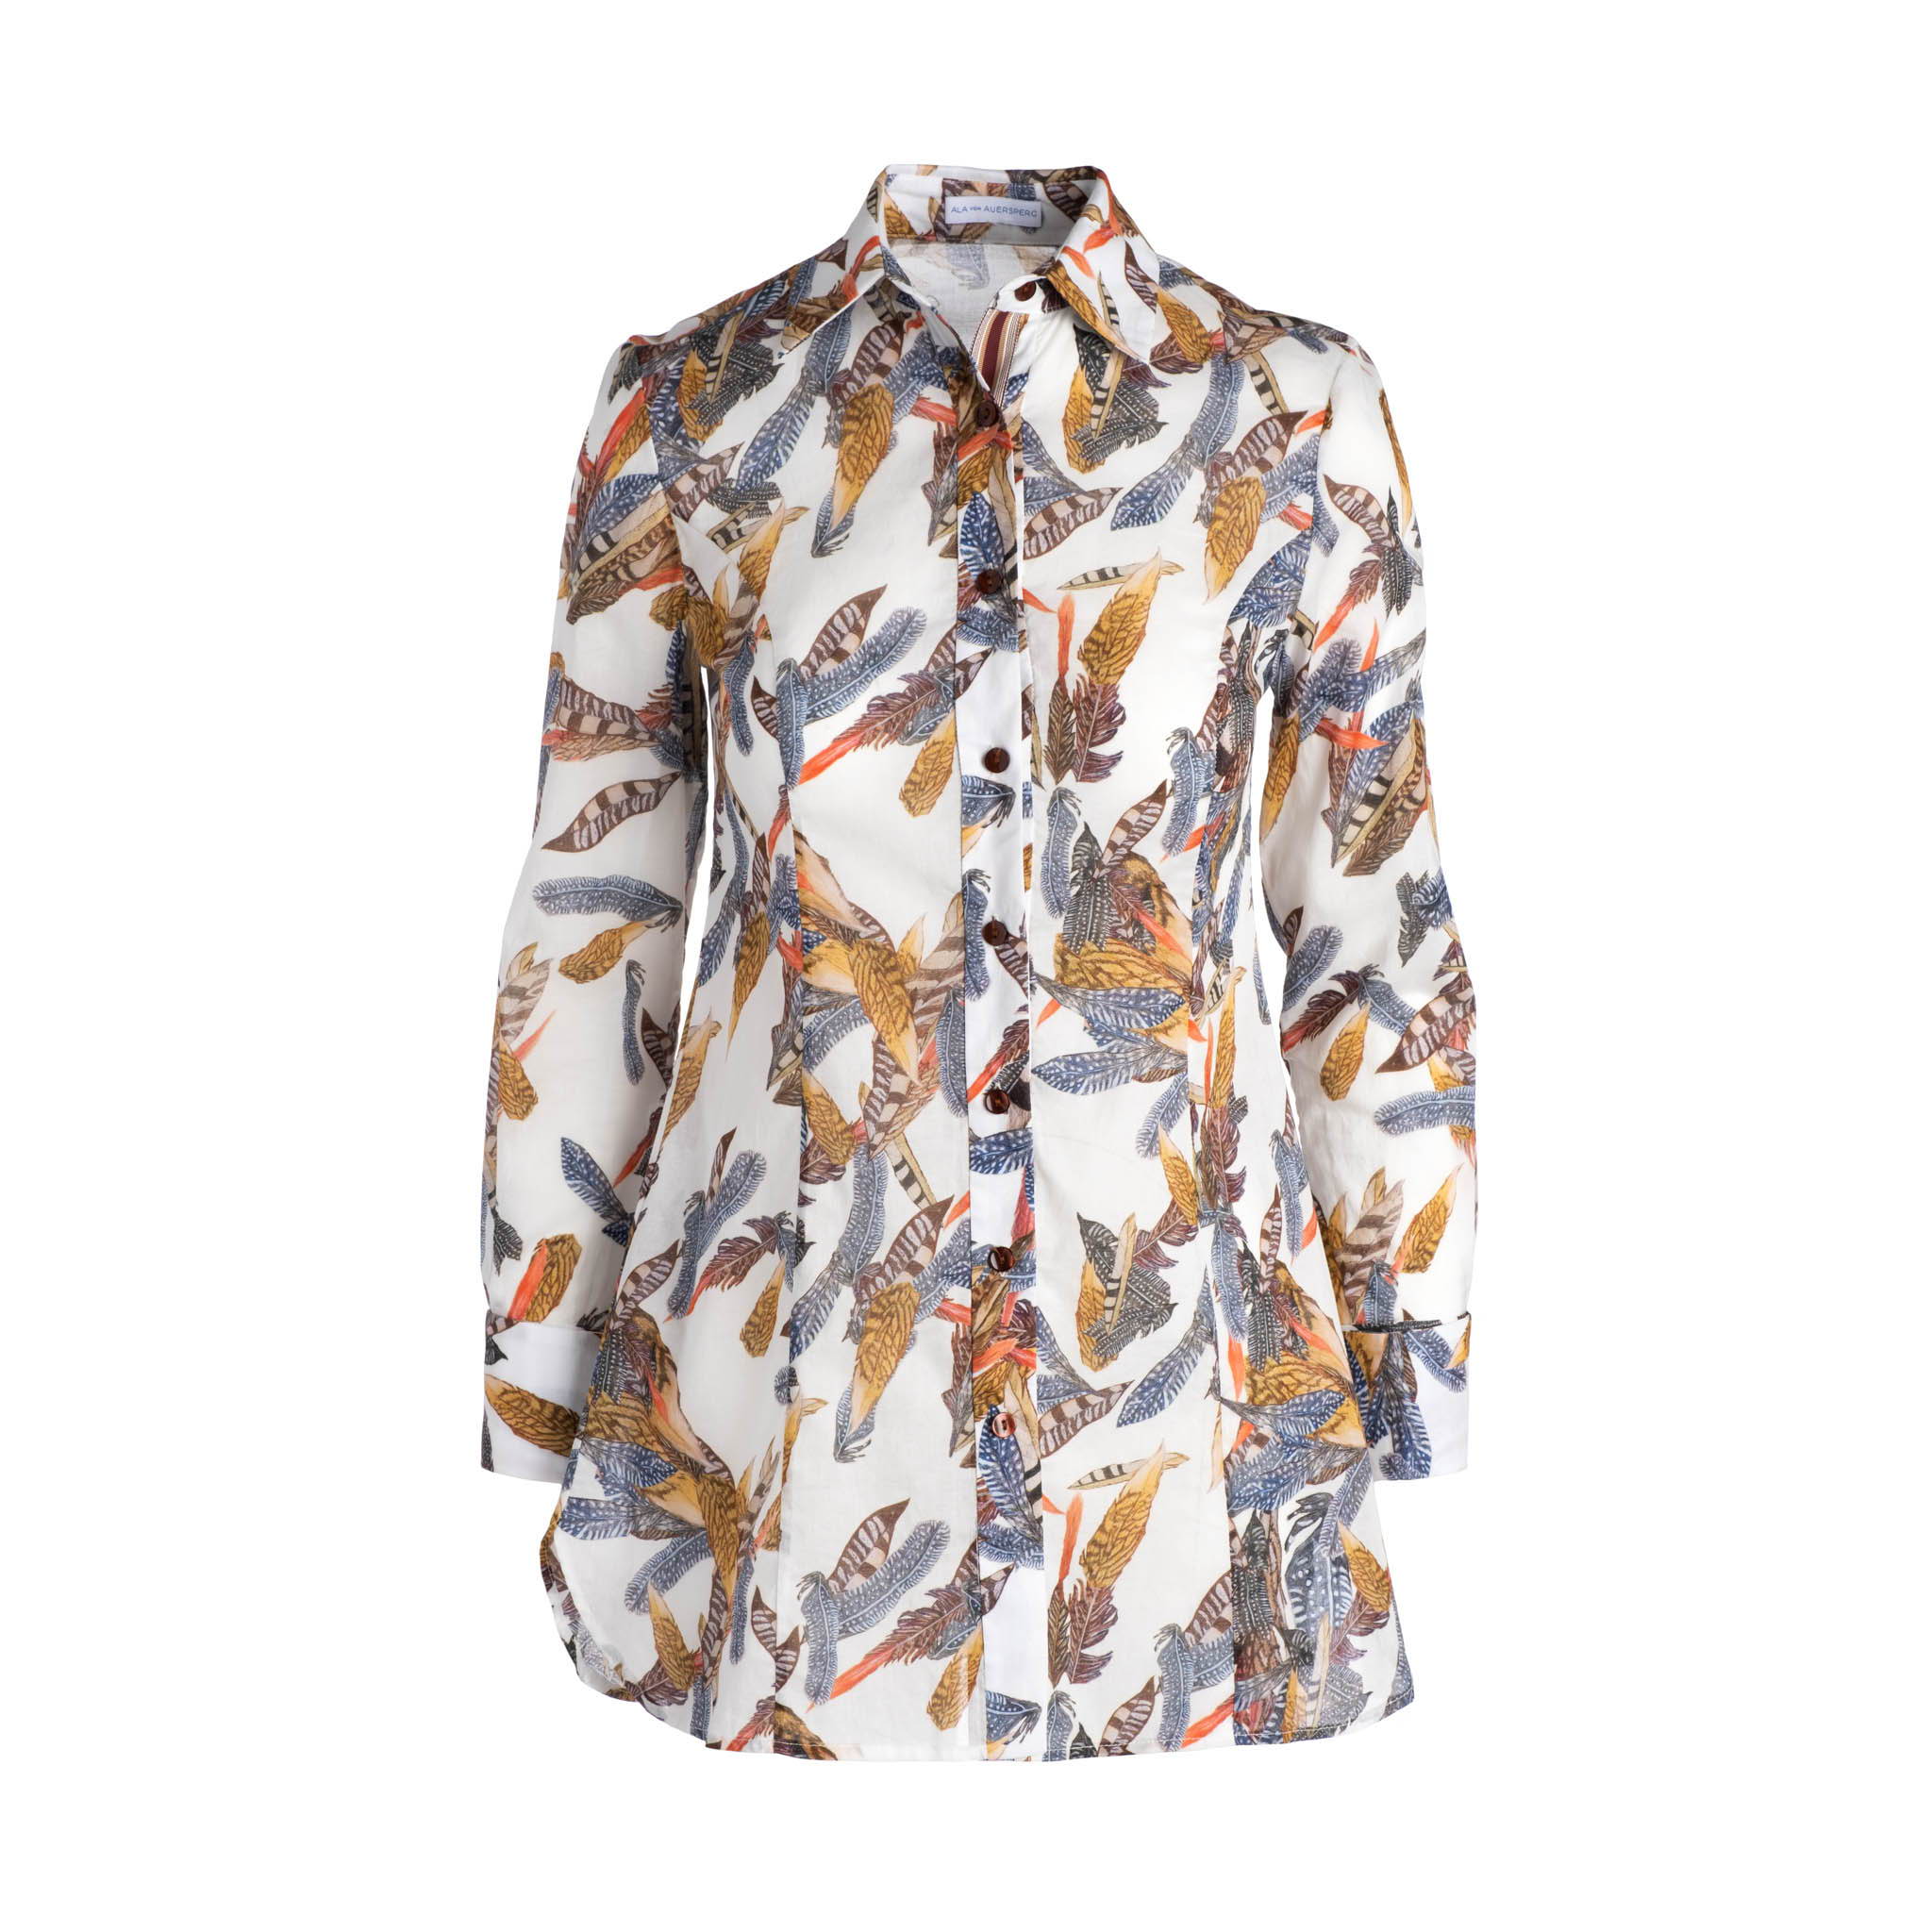 Flat image of feather printed cotton white blouse by Ala von Auersperg